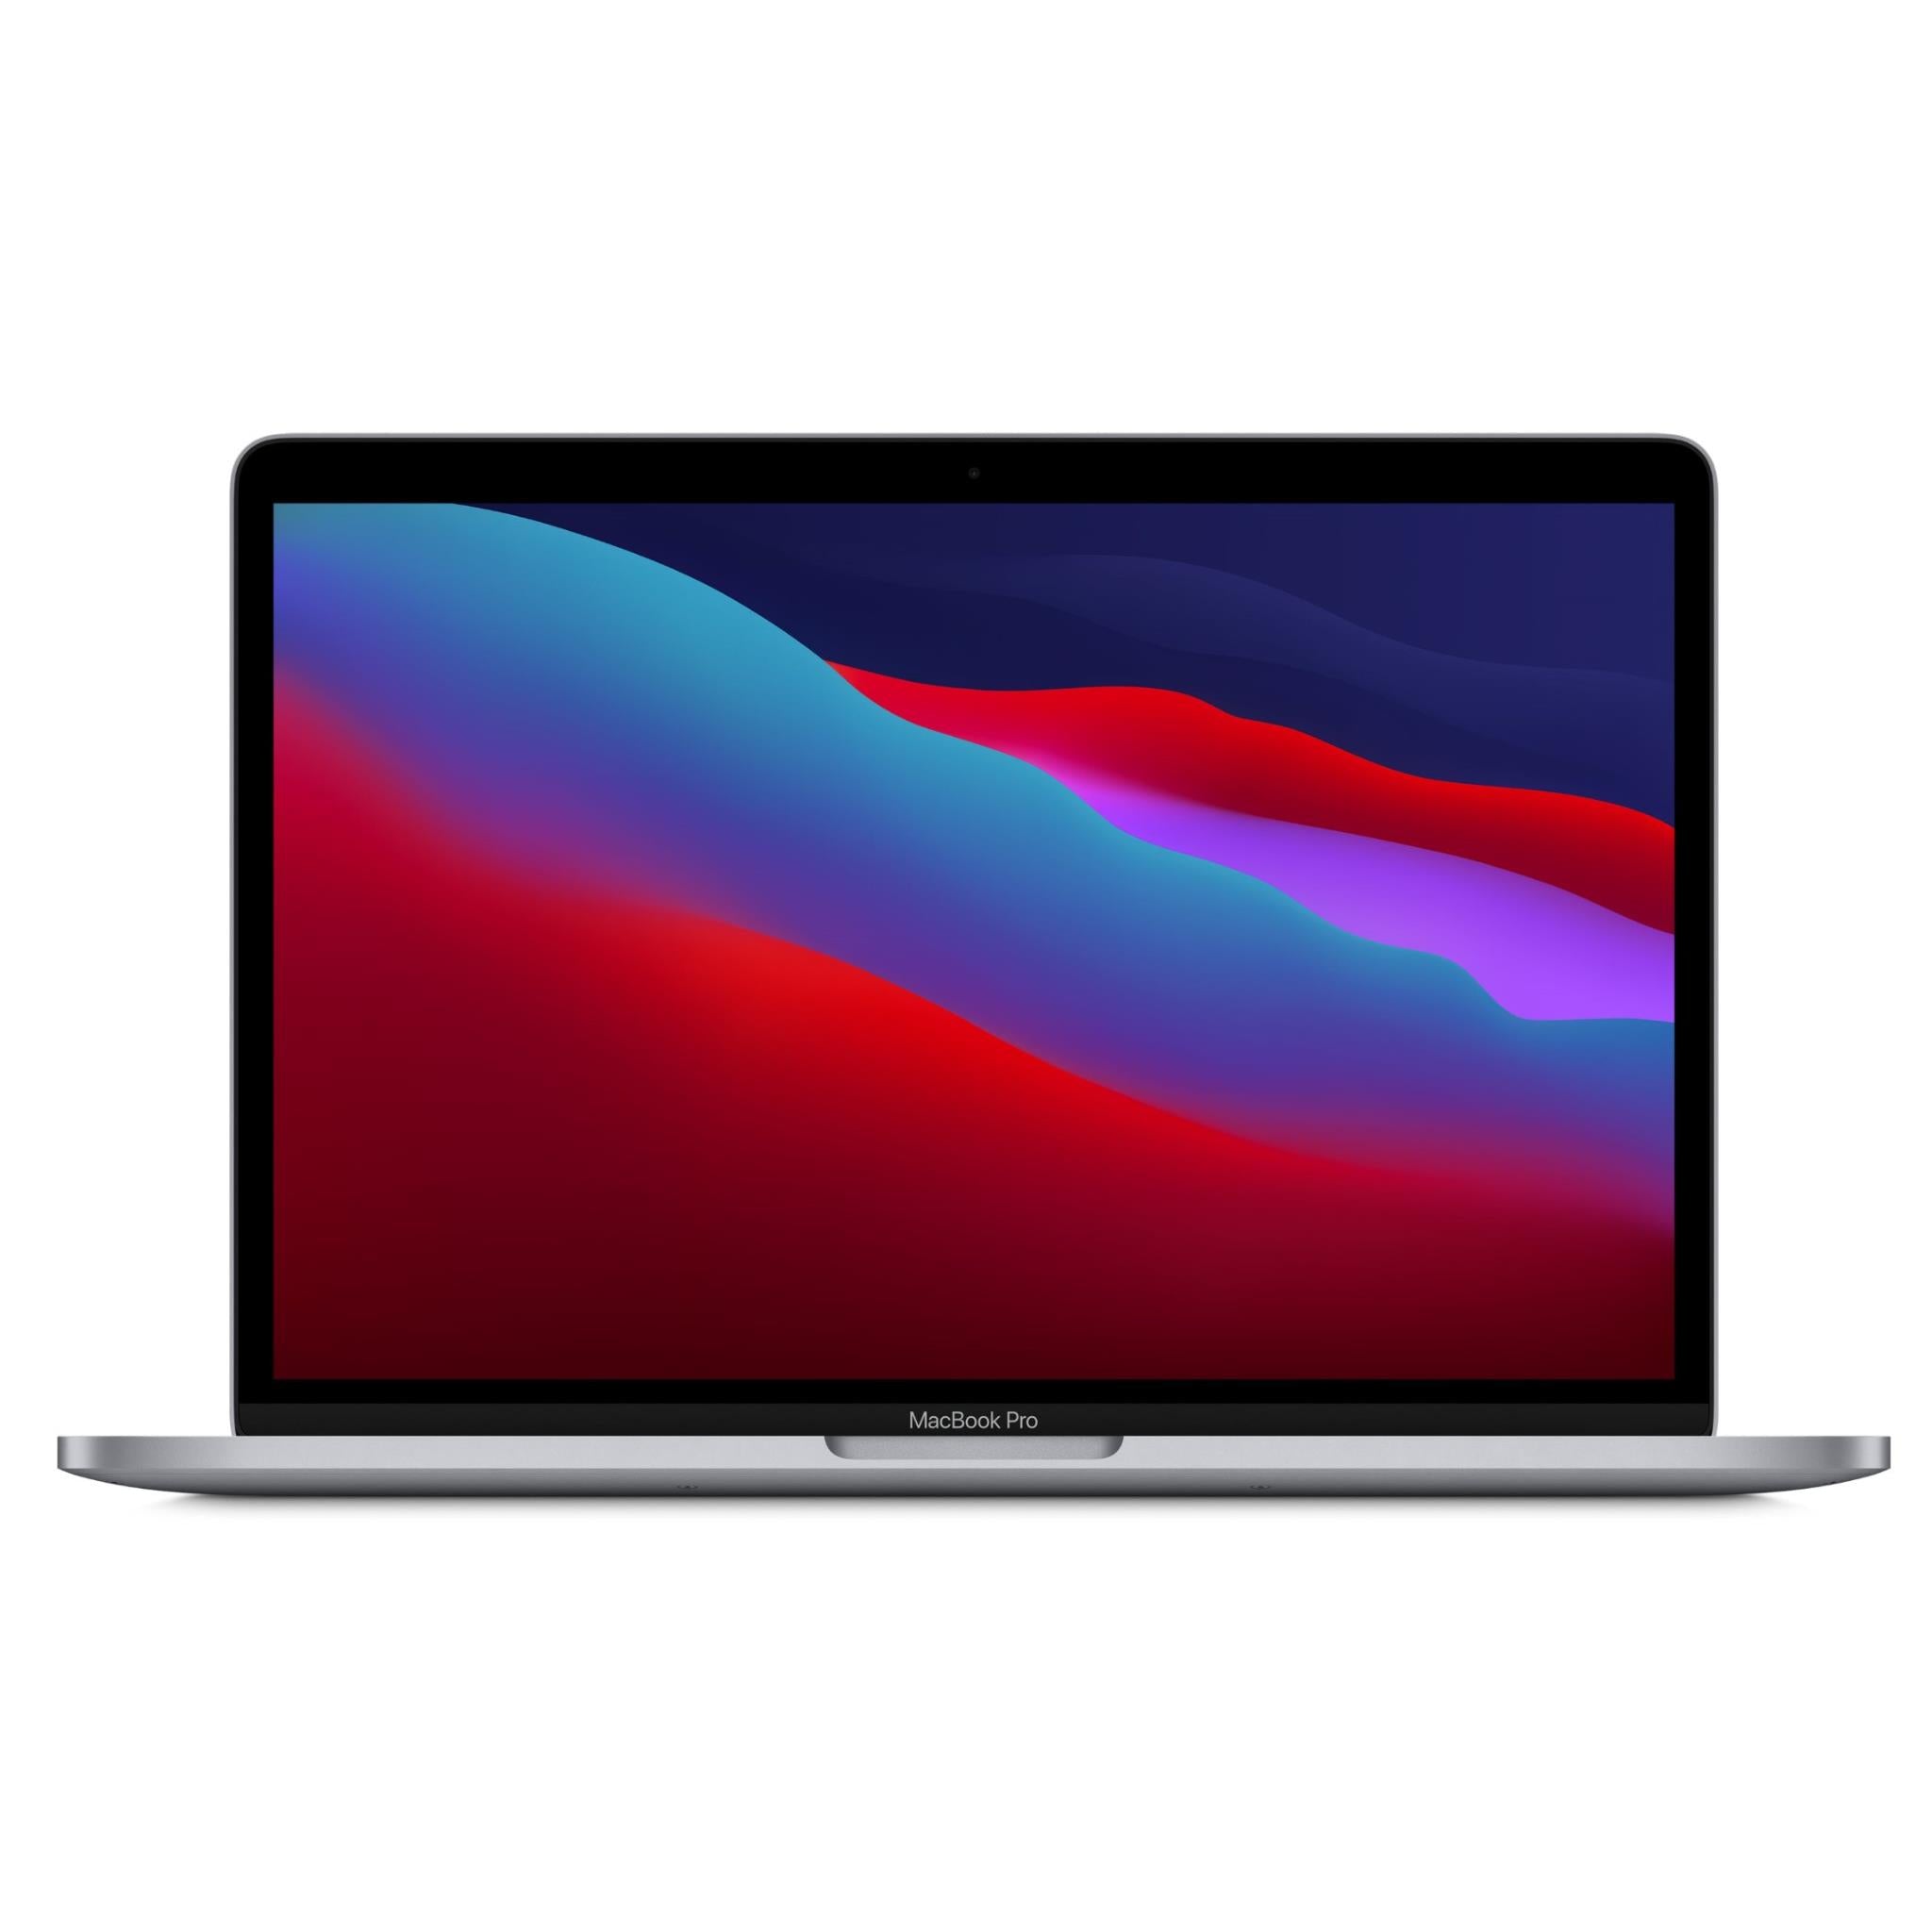 apple macbook pro 13-inch with m1 chip, 512gb ssd 2020 (space grey) [^refurbished]